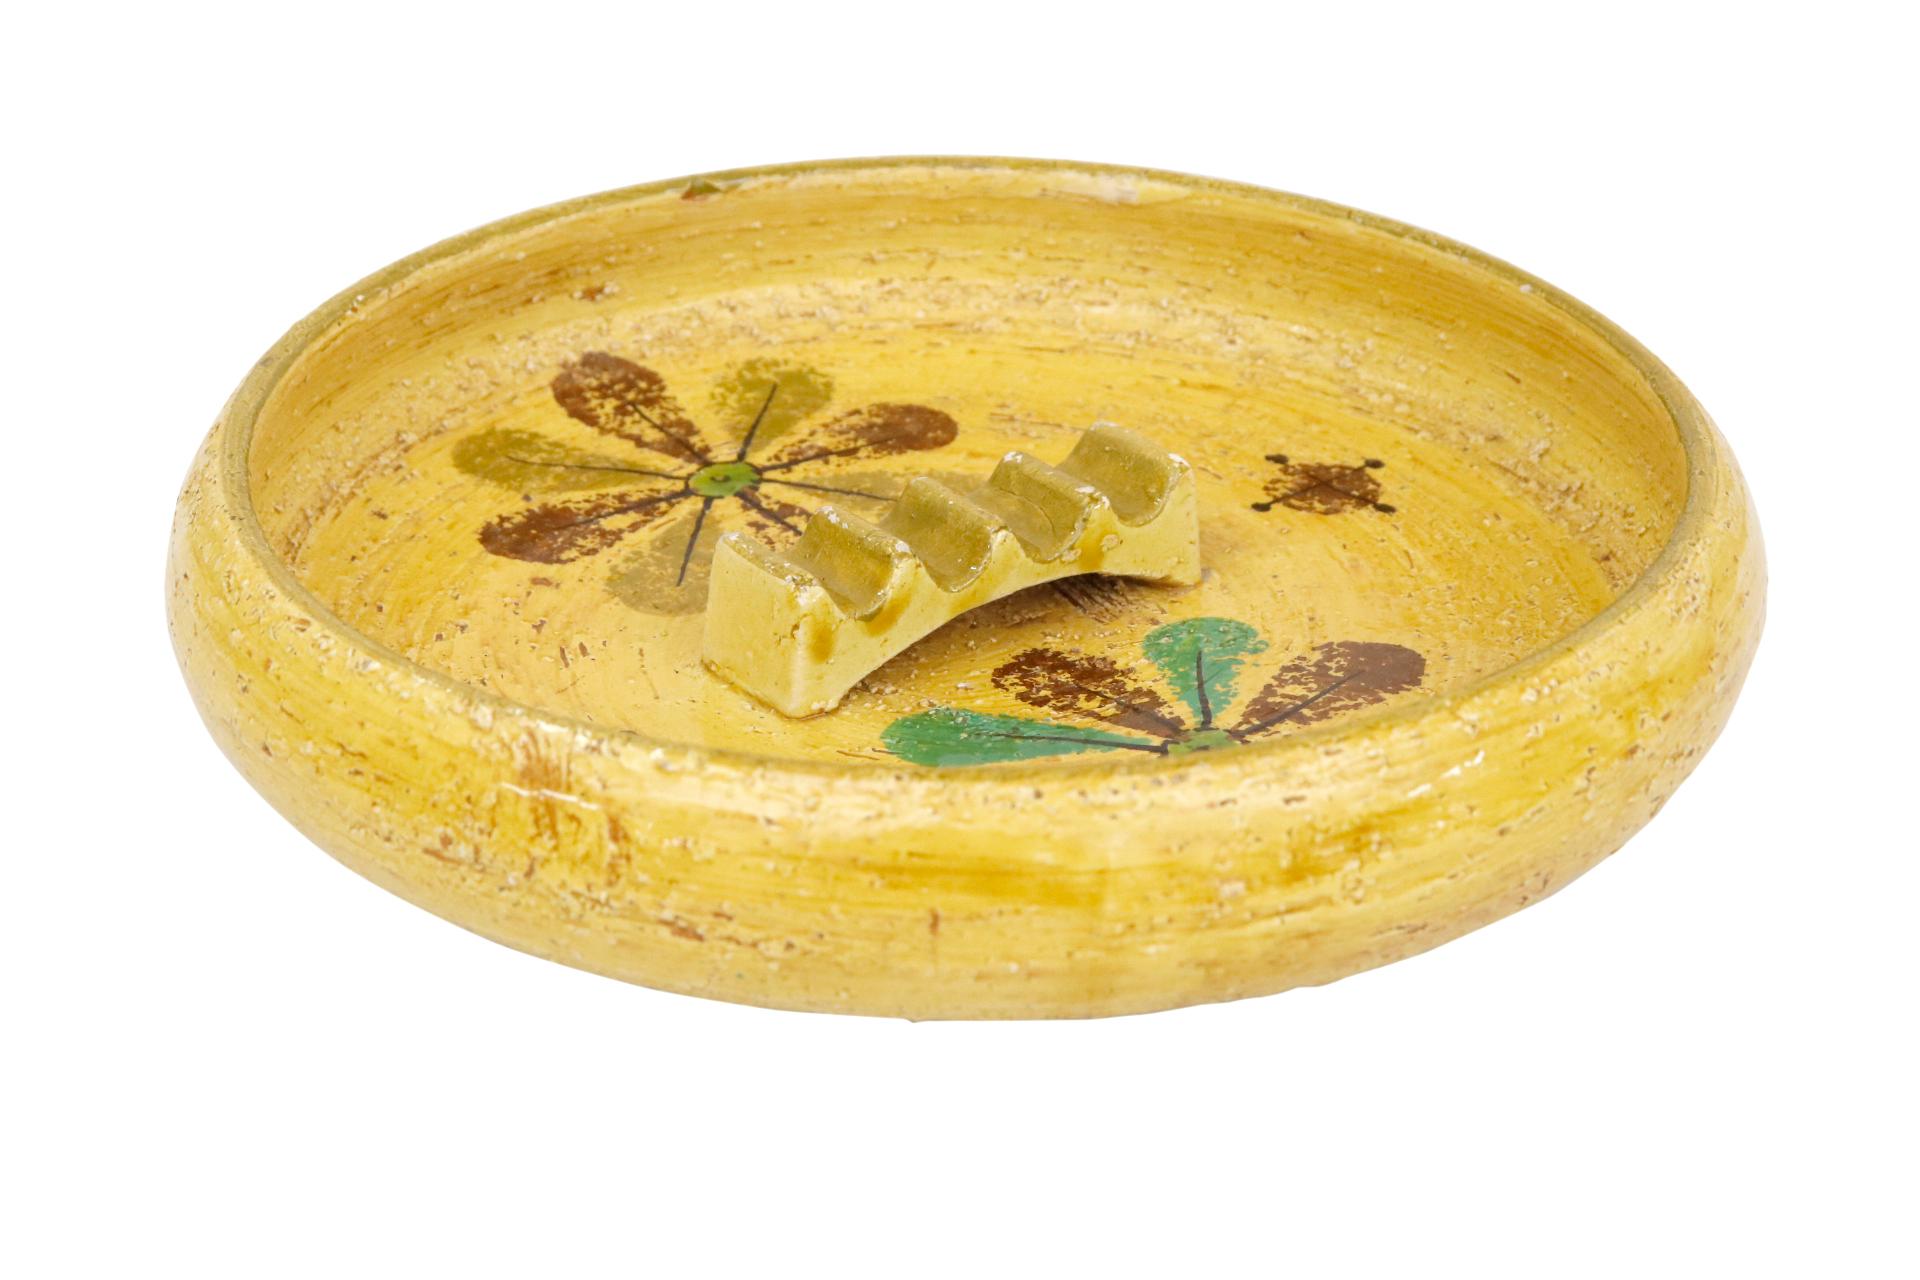 A 1950’s Aldo Londi for Bitossi Italian ceramic ashtray. Decorated with atomic style flowers in brown, teal and olive on a mustard yellow background. At the center is a raised cigarette holder. Rosenthal Netter label can be seen underneath.